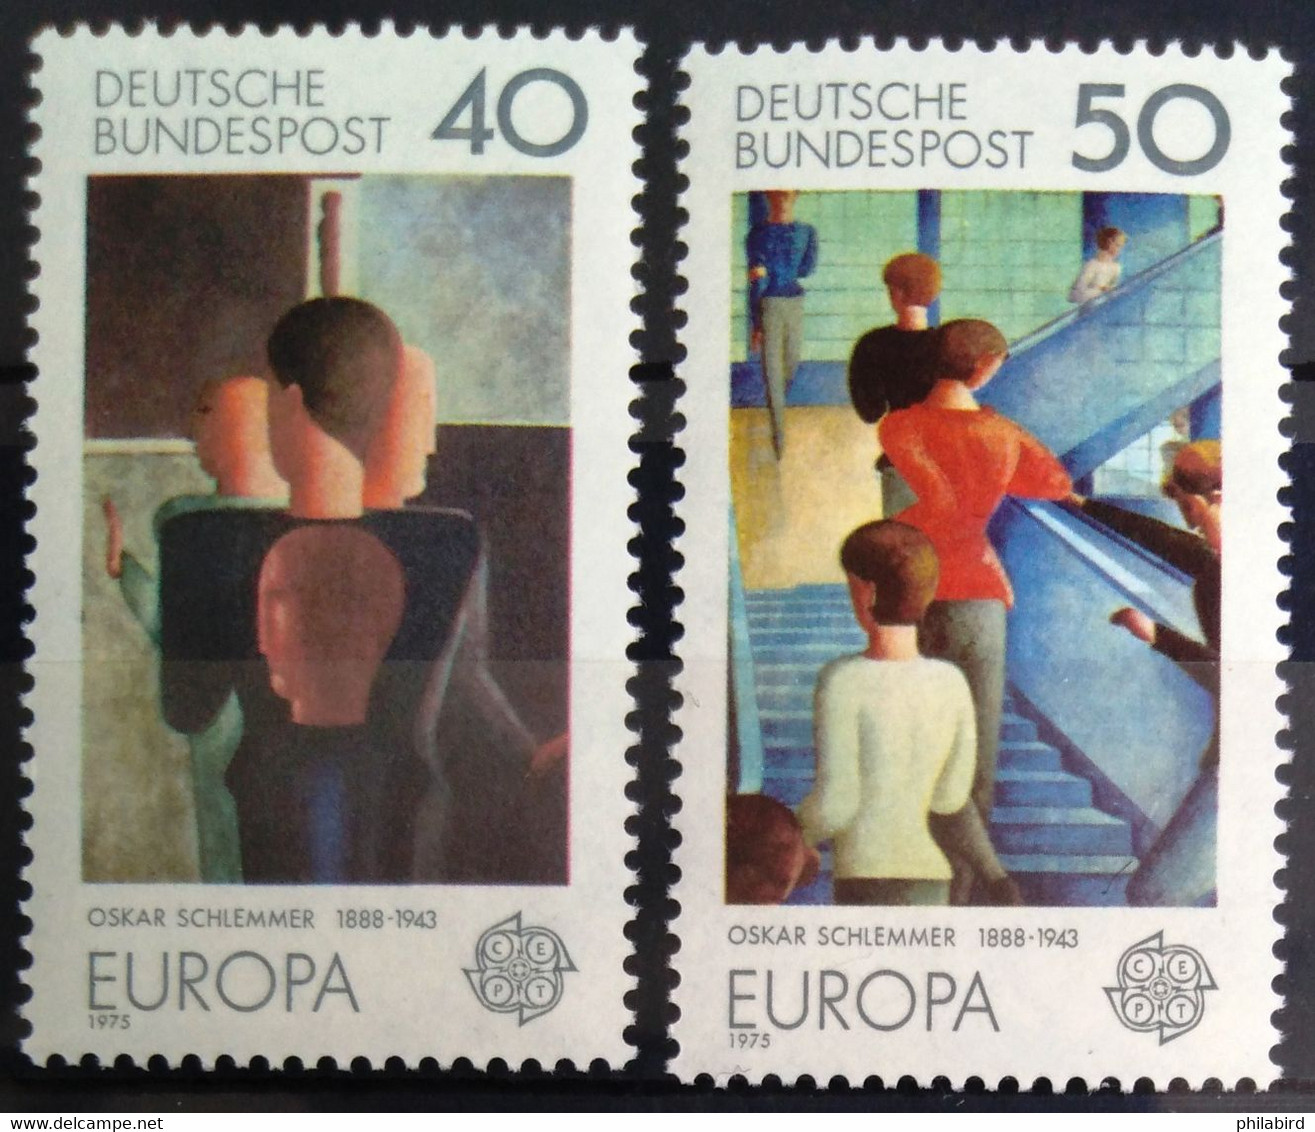 EUROPA 1975 - ALLEMAGNE                    N° 689/690                        NEUF** - 1975